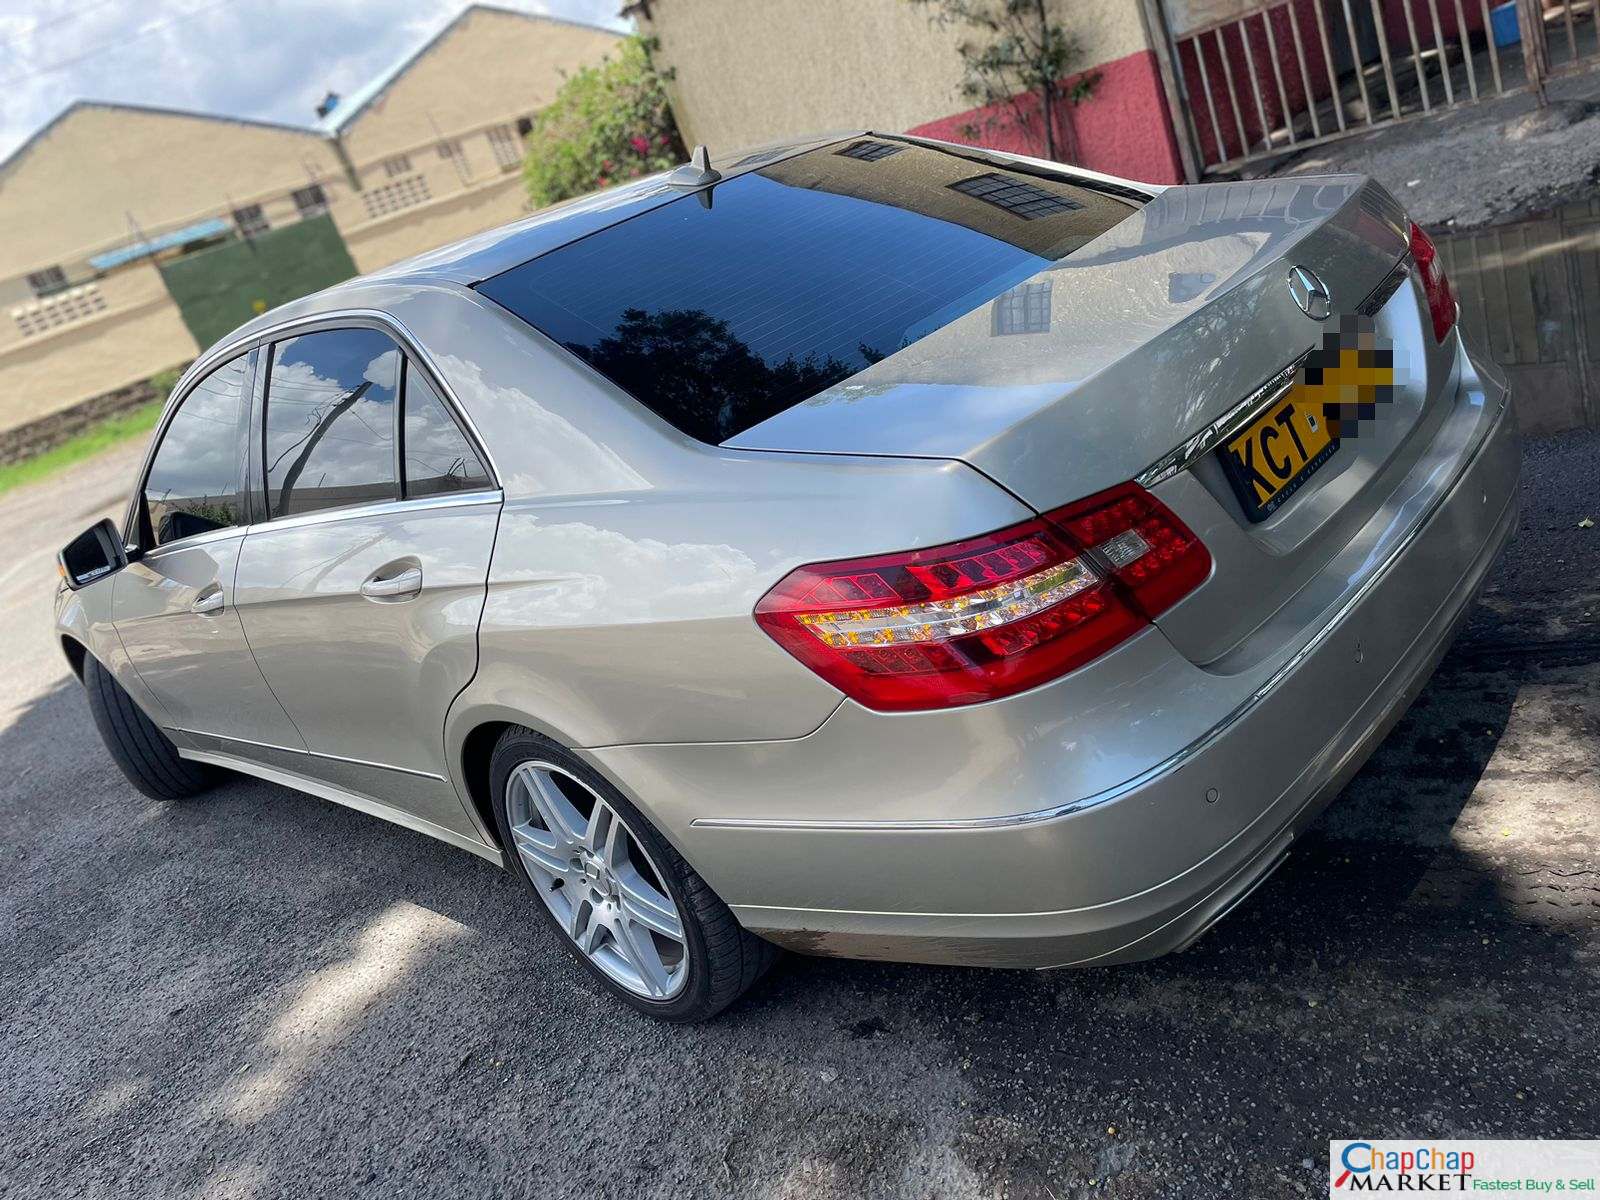 Mercedes Benz E250 SUNROOF QUICK SALE You Pay 30% DEPOSIT Trade in OK EXCLUSIVE